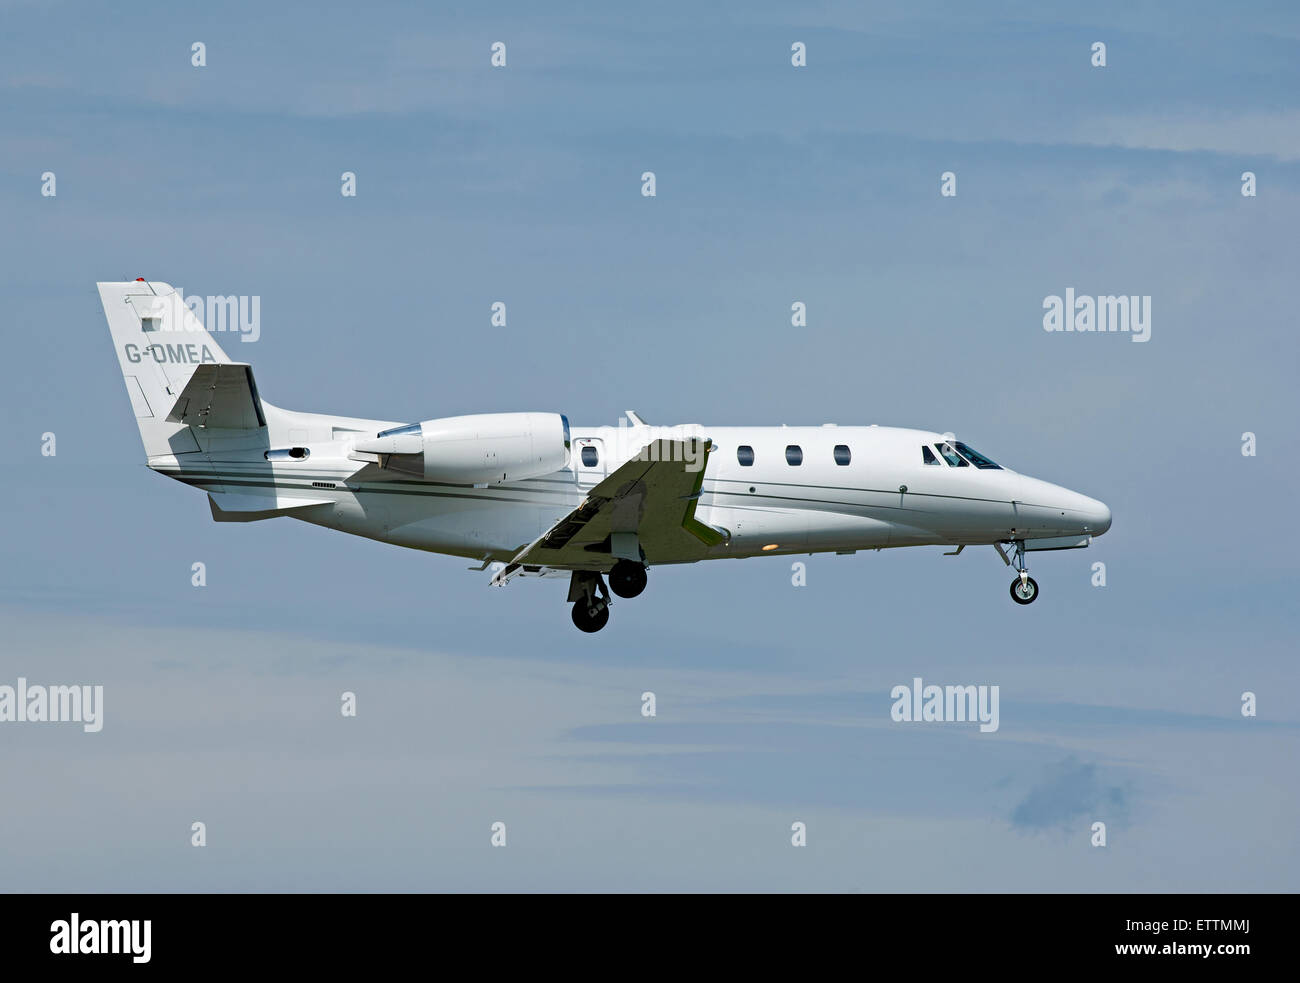 The Cessna Citation XLS 560 G-OMEA on approach to Inverness Airport Scotland.  SCO 9887. Stock Photo